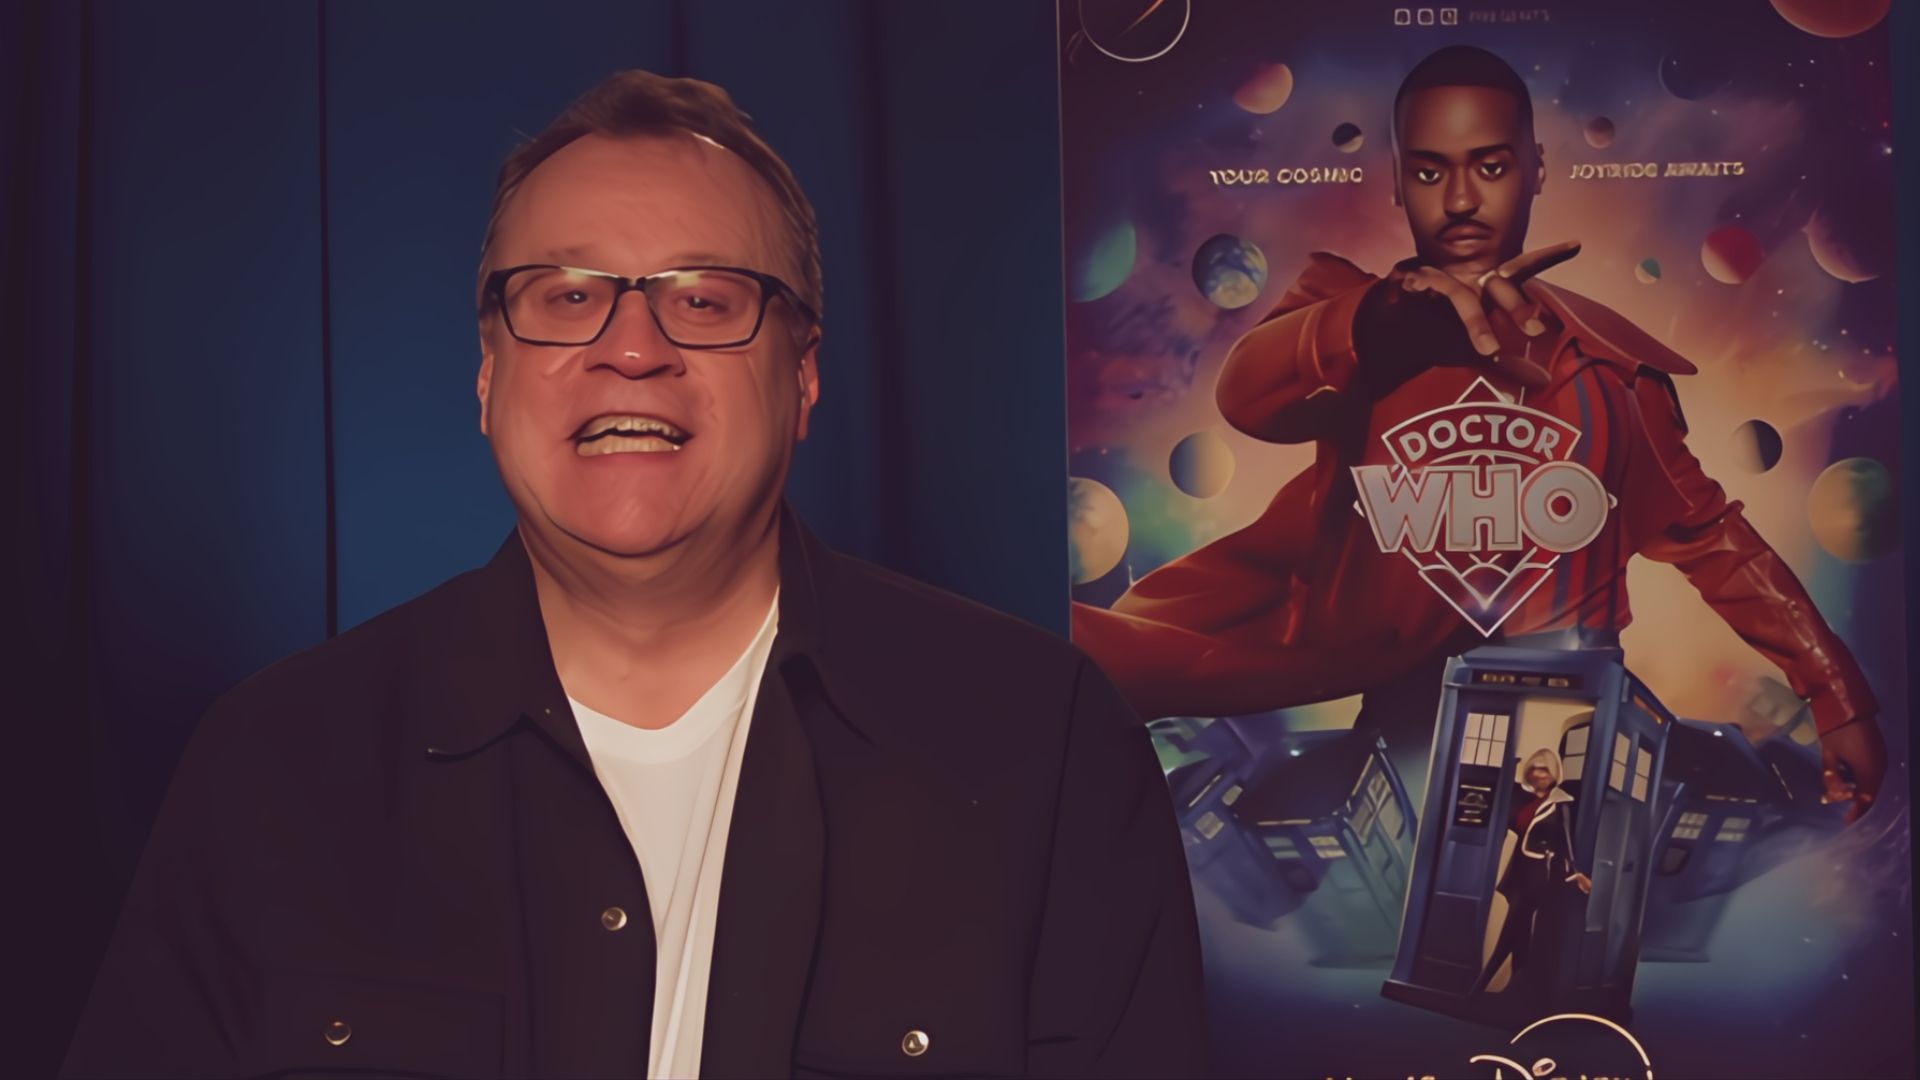 Russell T. Davies interview for Doctor Who Season 14 on Disney with Ncuti Gatwa